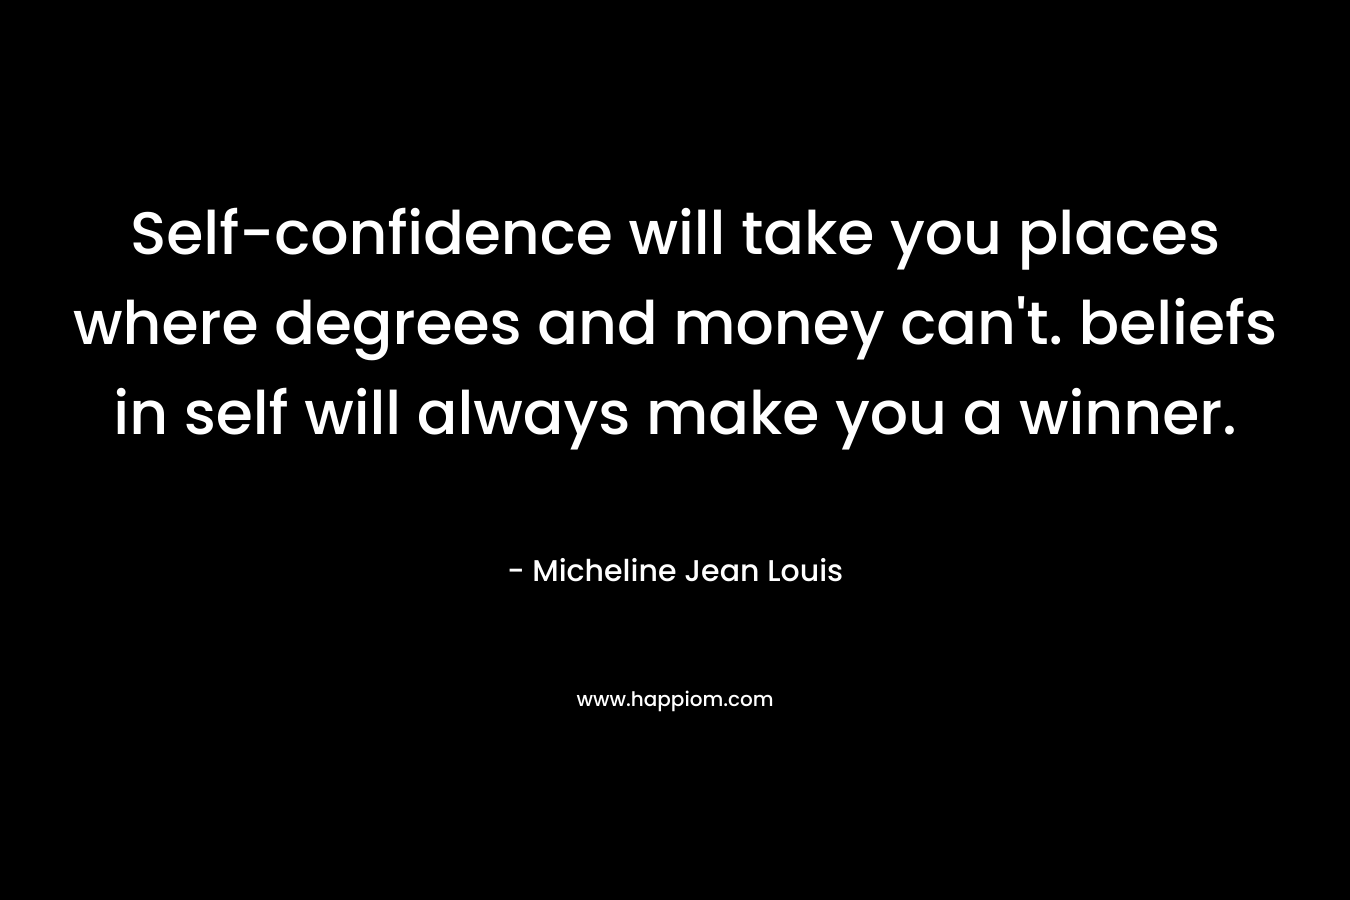 Self-confidence will take you places where degrees and money can’t. beliefs in self will always make you a winner. – Micheline Jean Louis